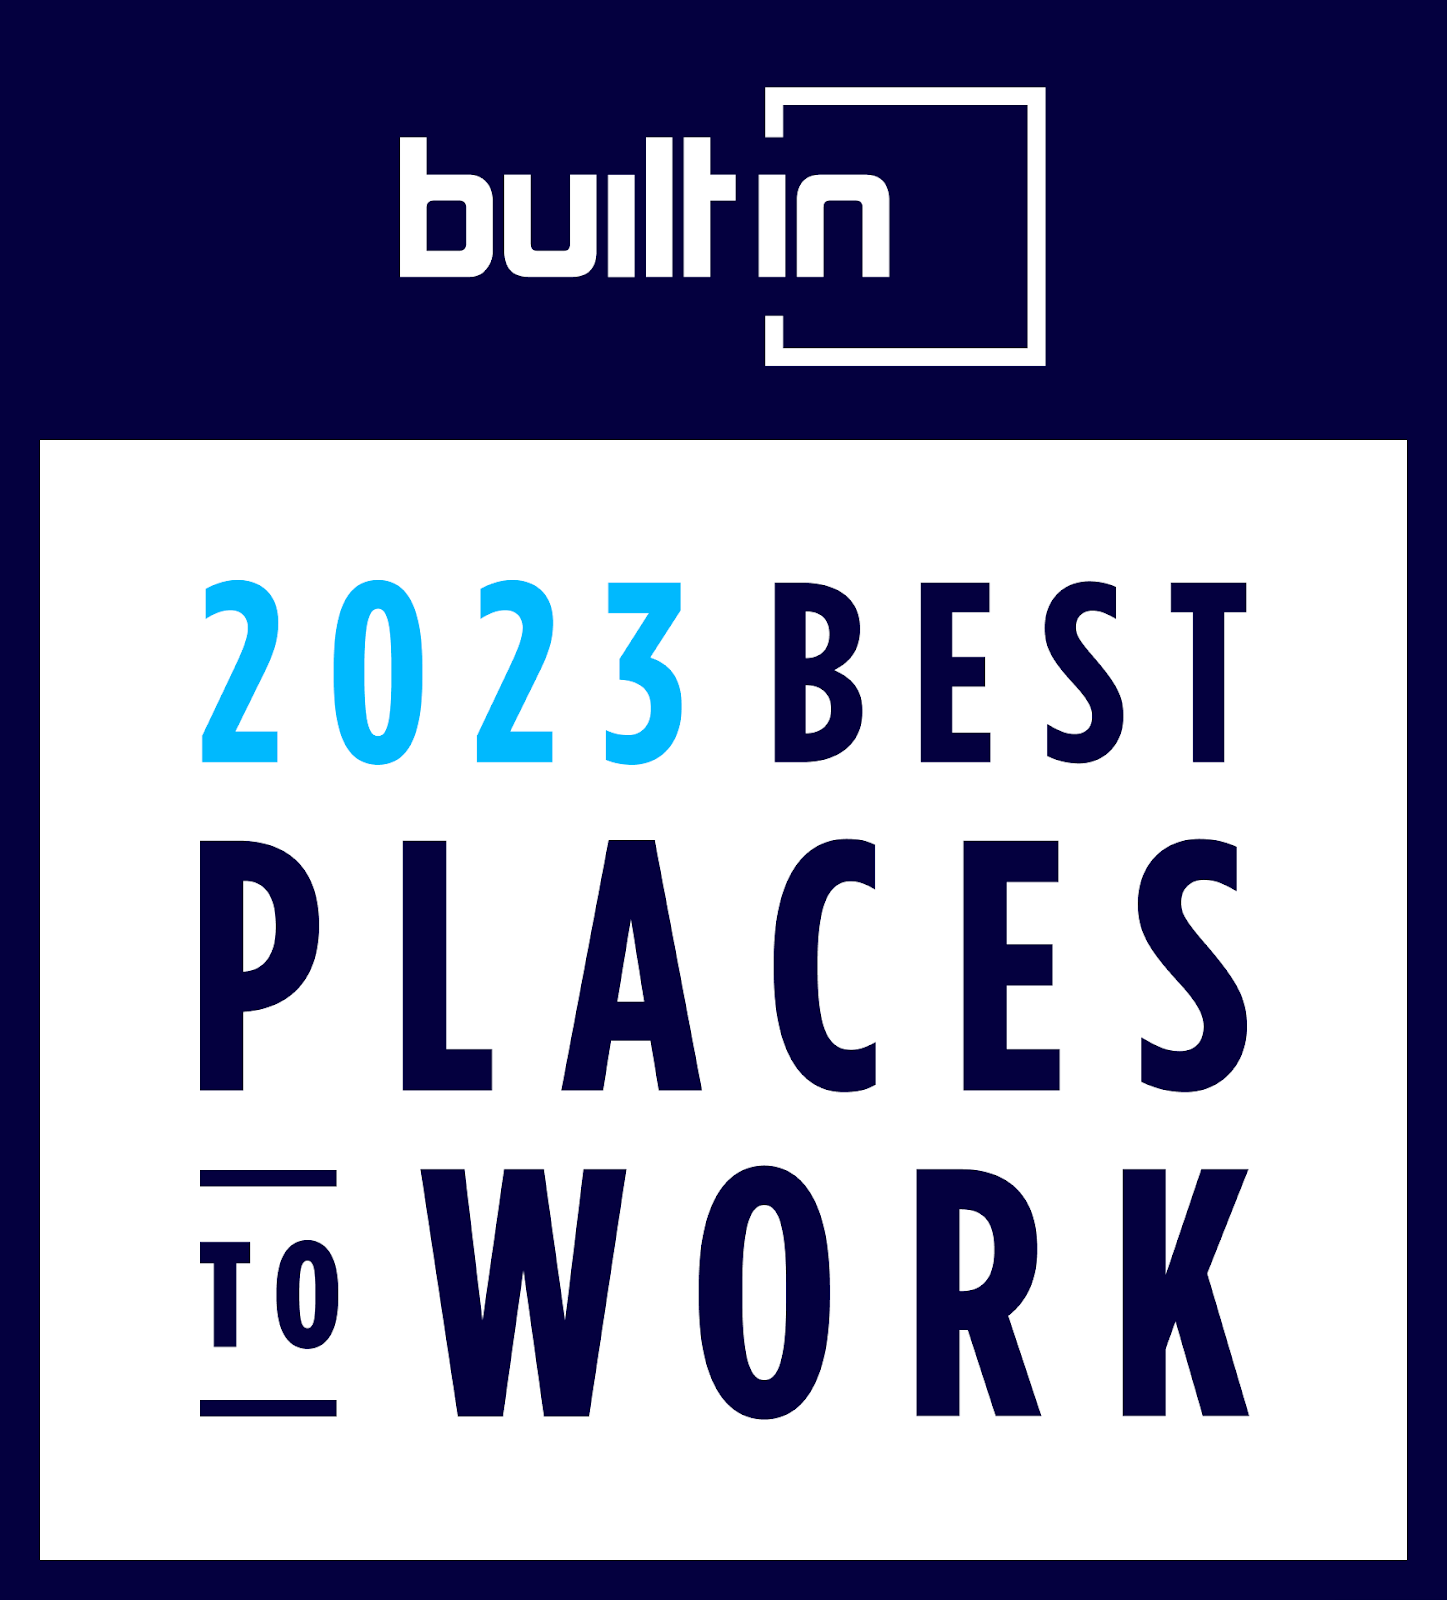 100 Best Places to Work in the US 2023